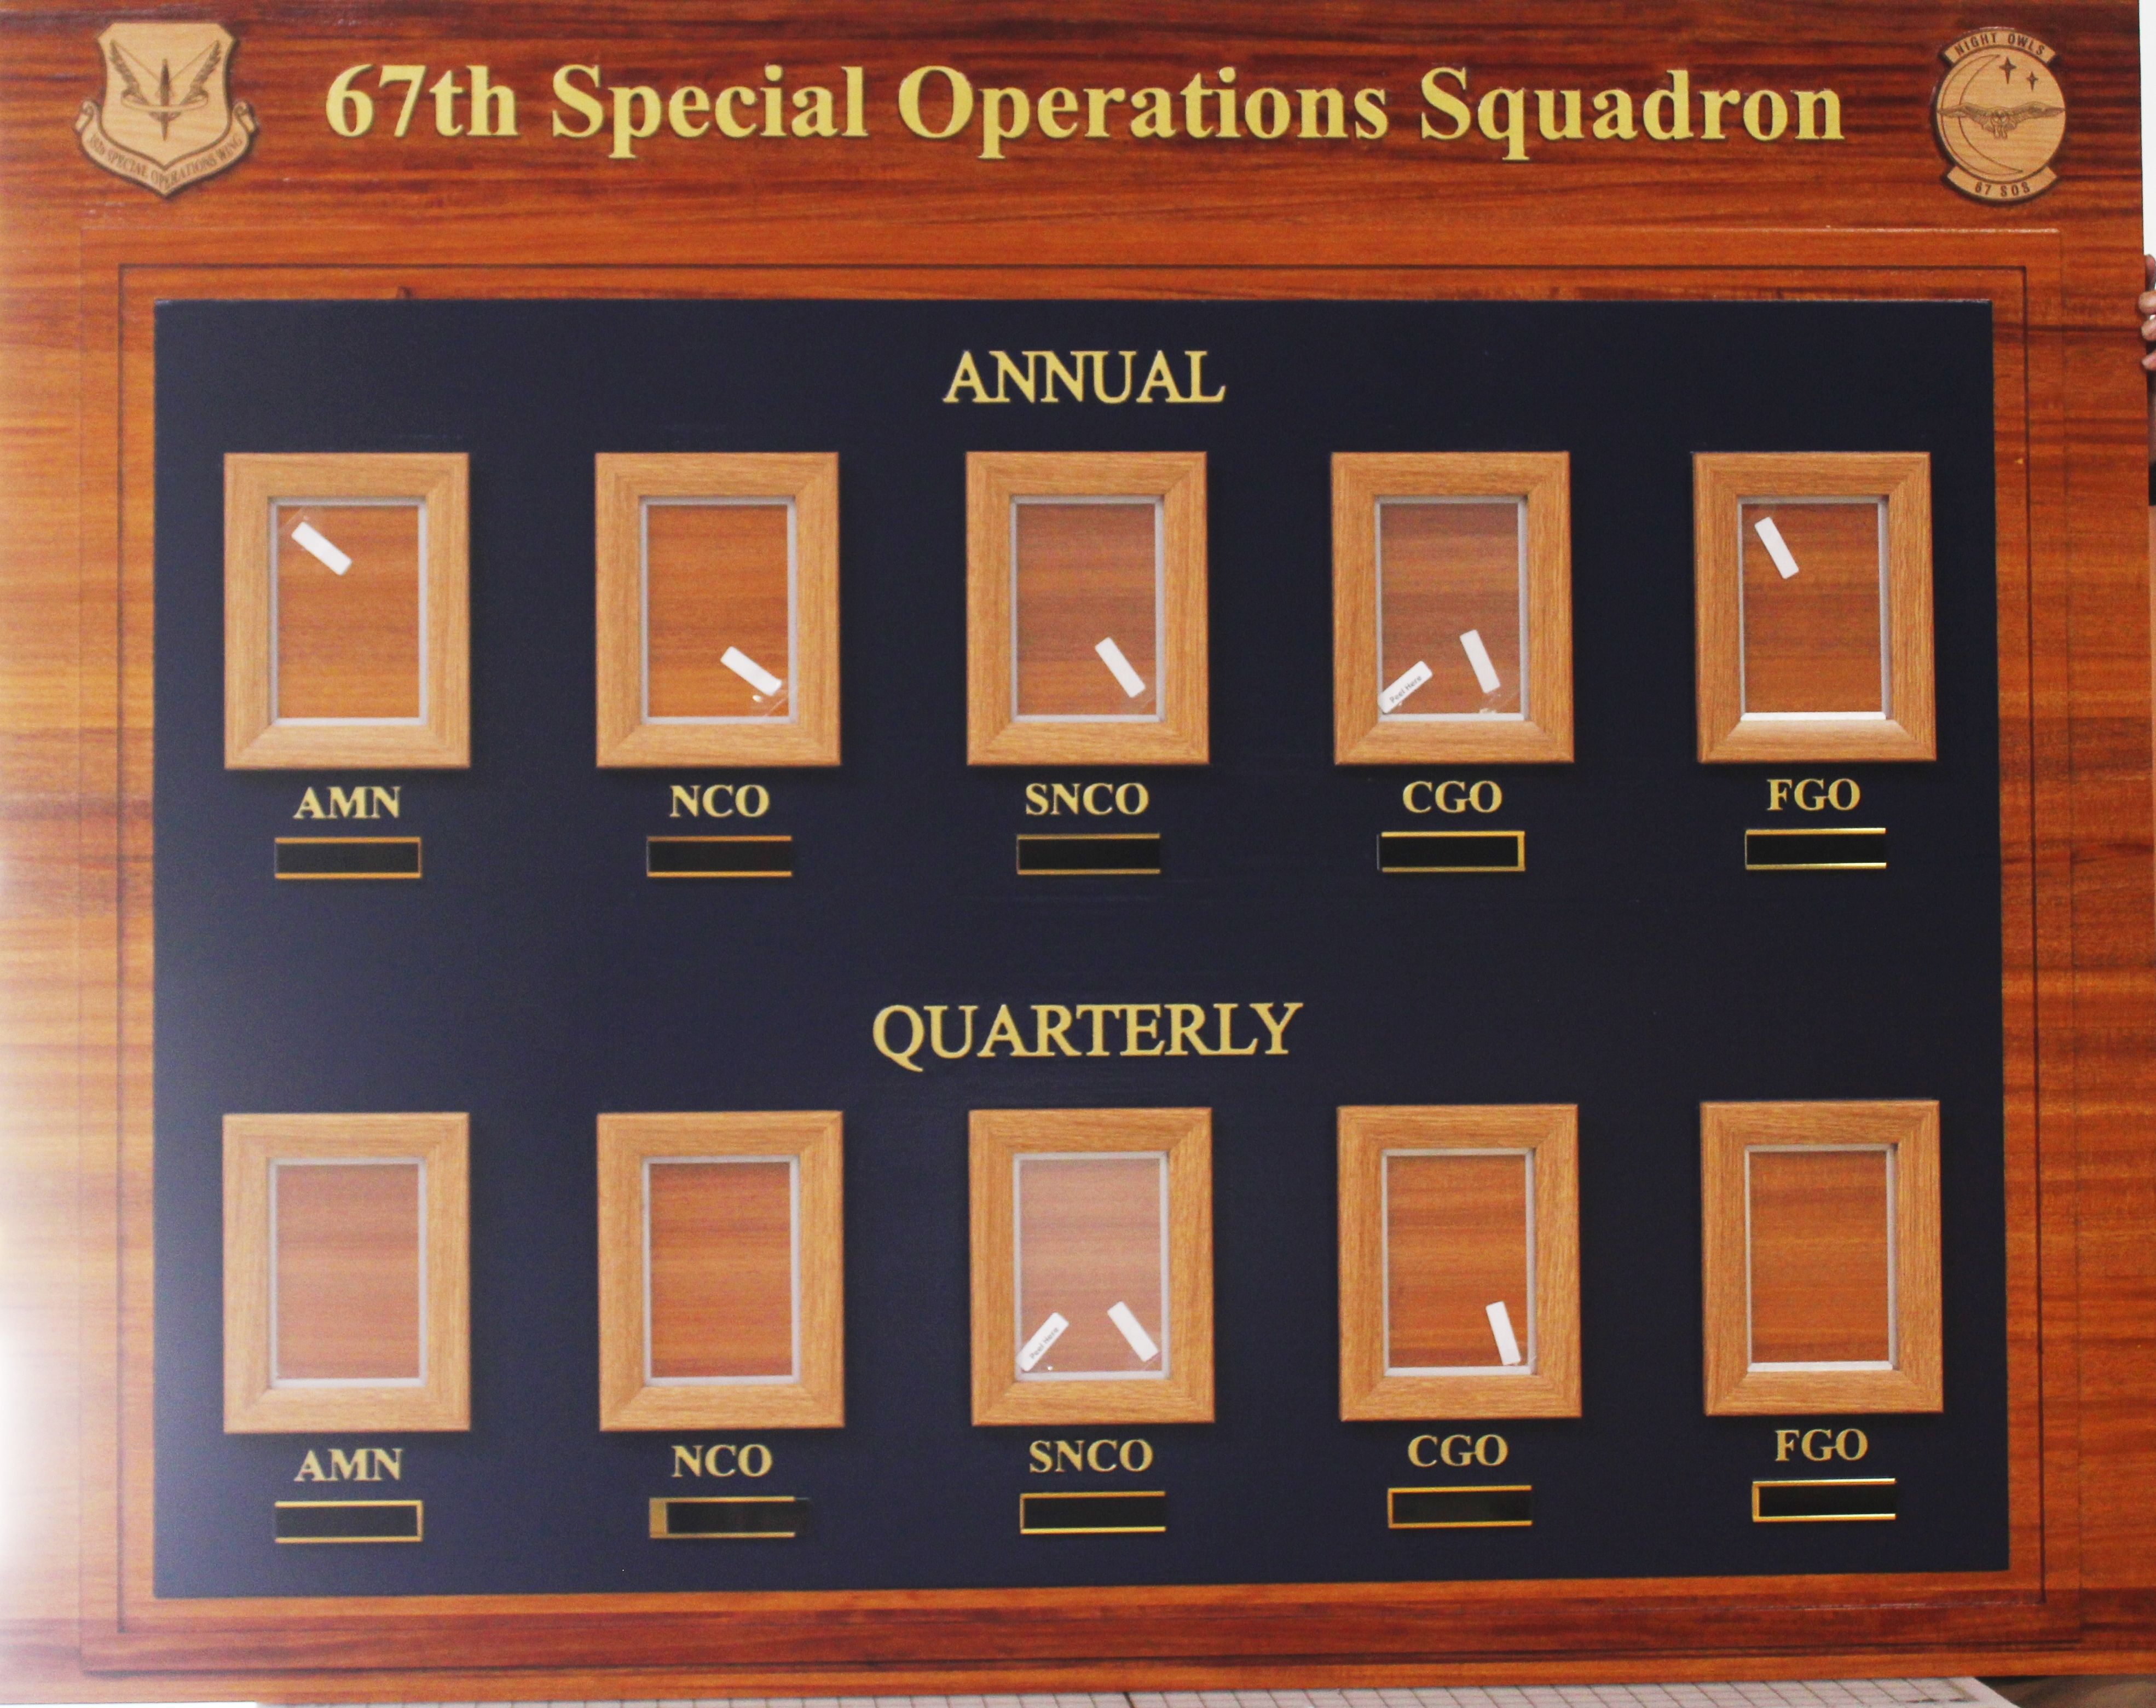 LP-9050 - Carved Redwood Award Photo  Board for the Annual and Quarterly Outstanding Airmen of the 67th Special Operations Squadron